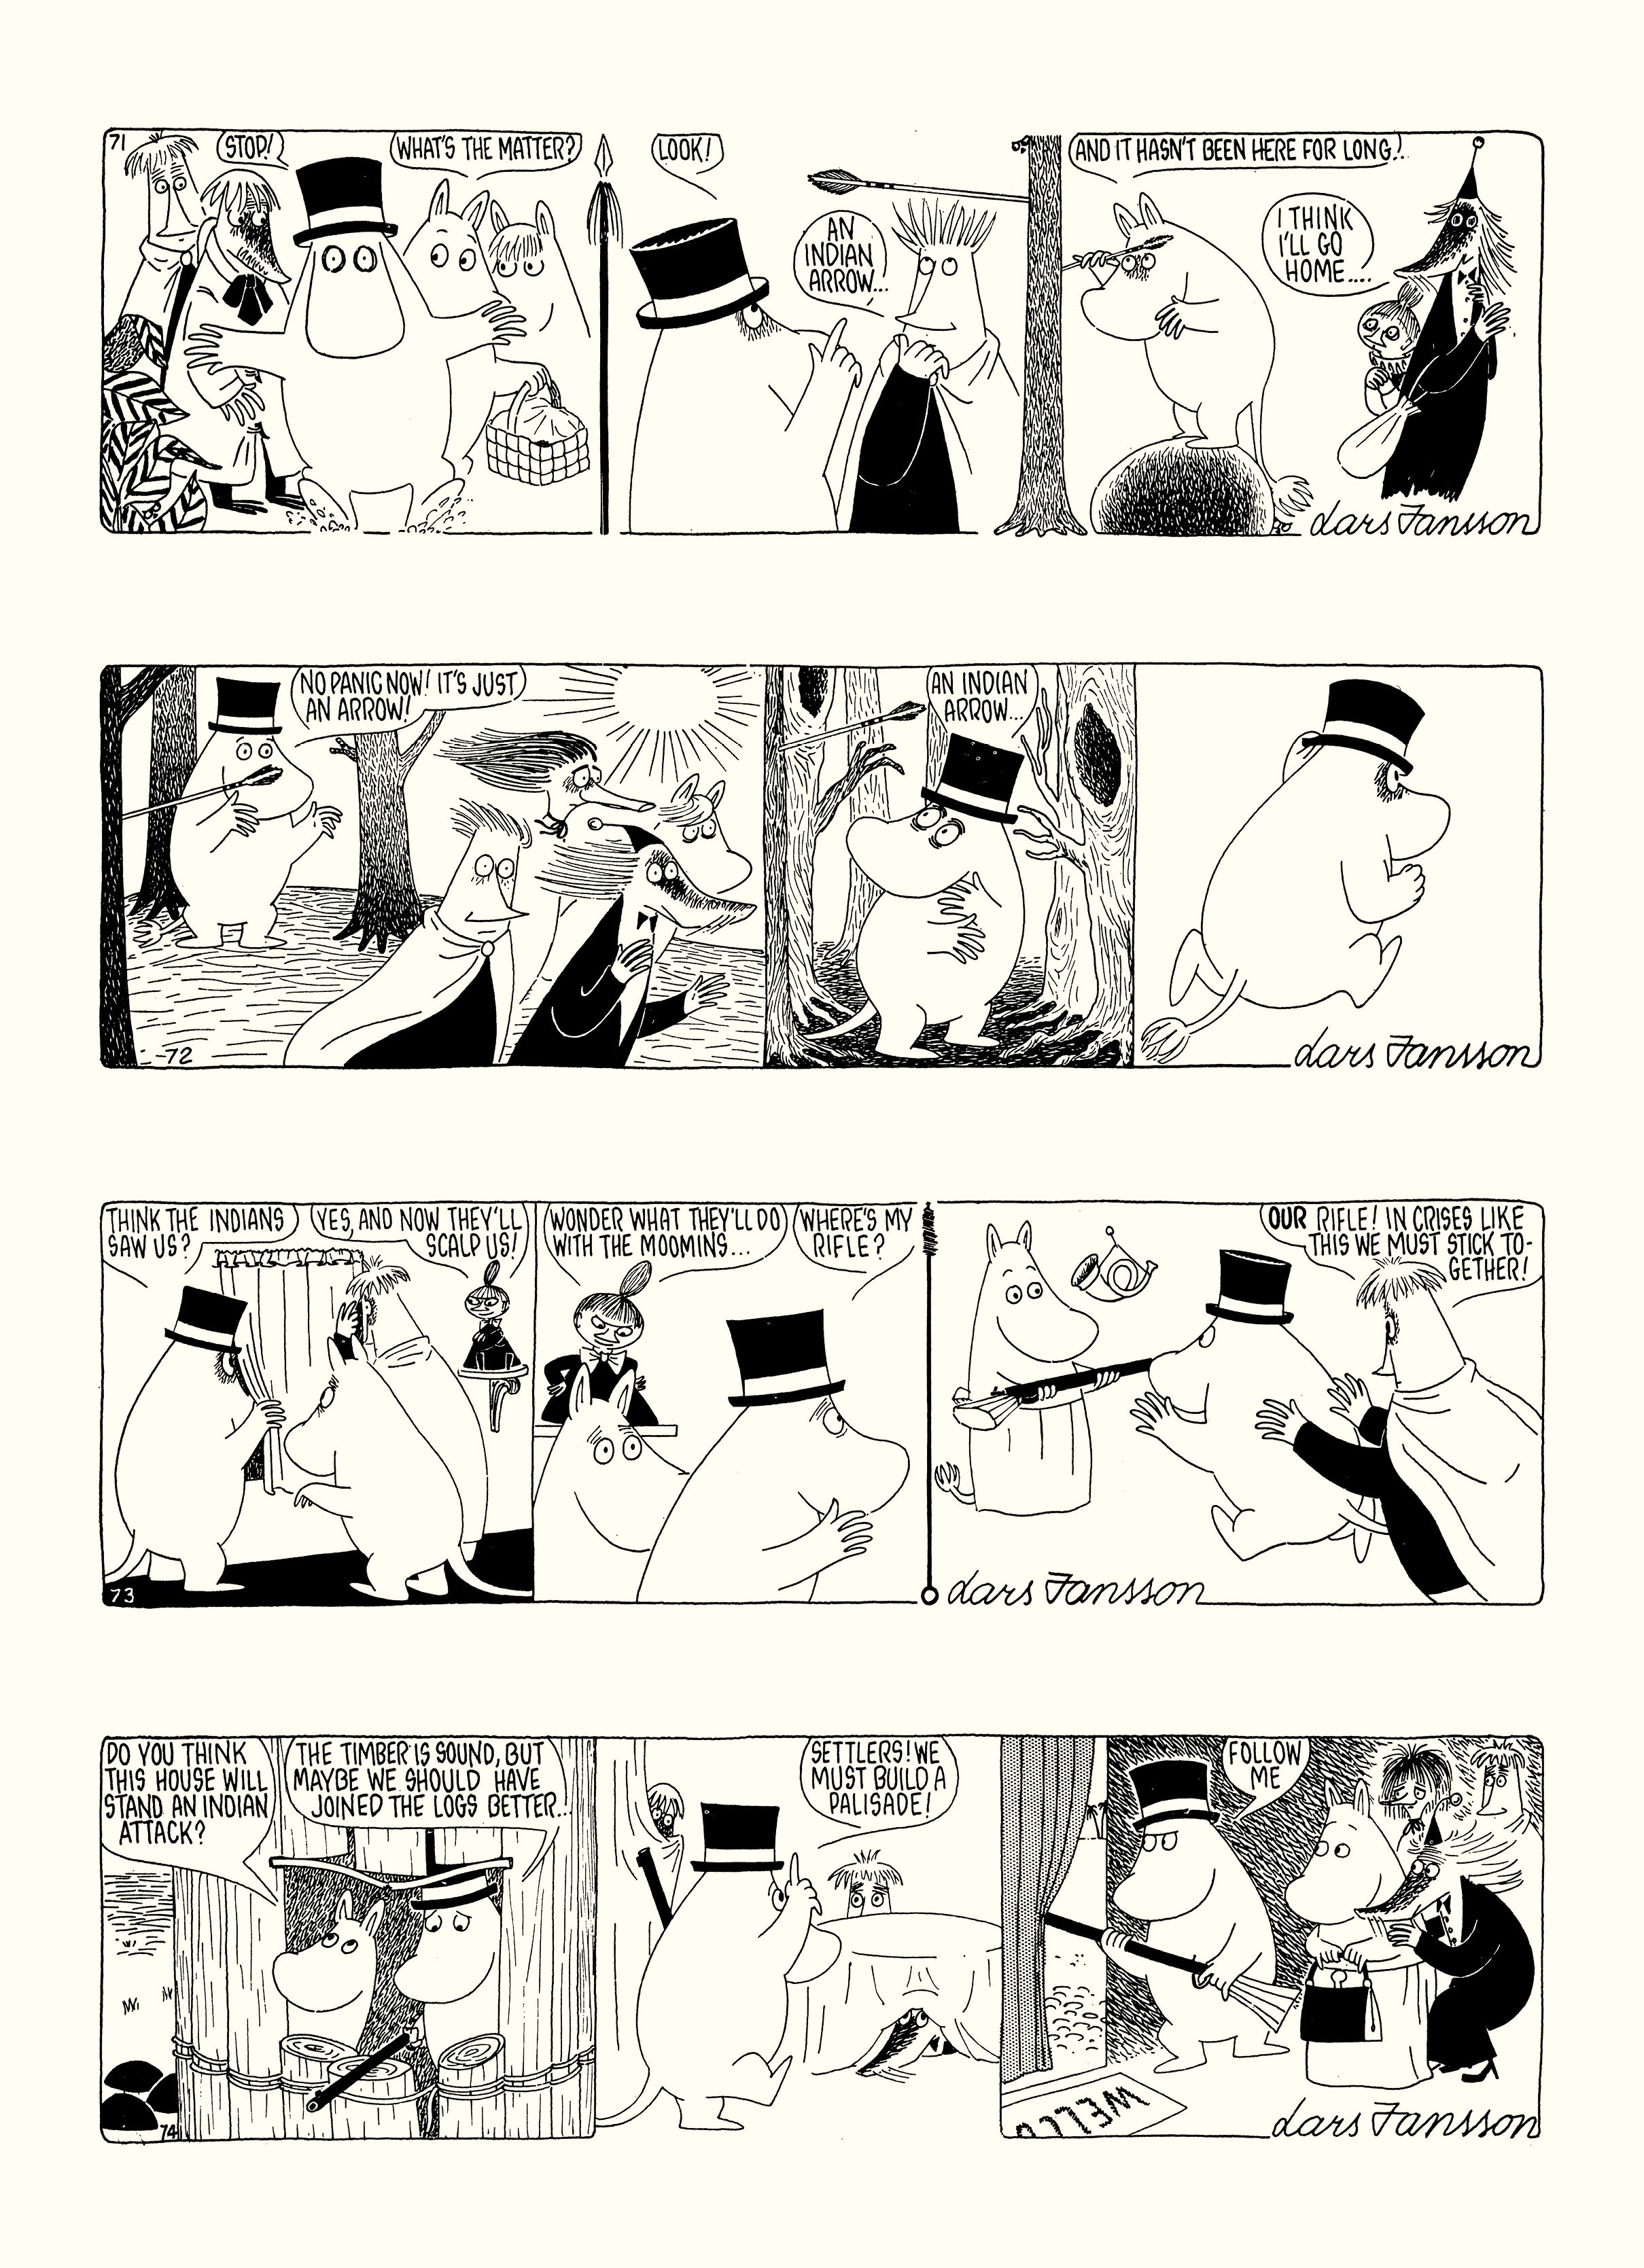 Read online Moomin: The Complete Lars Jansson Comic Strip comic -  Issue # TPB 7 - 24